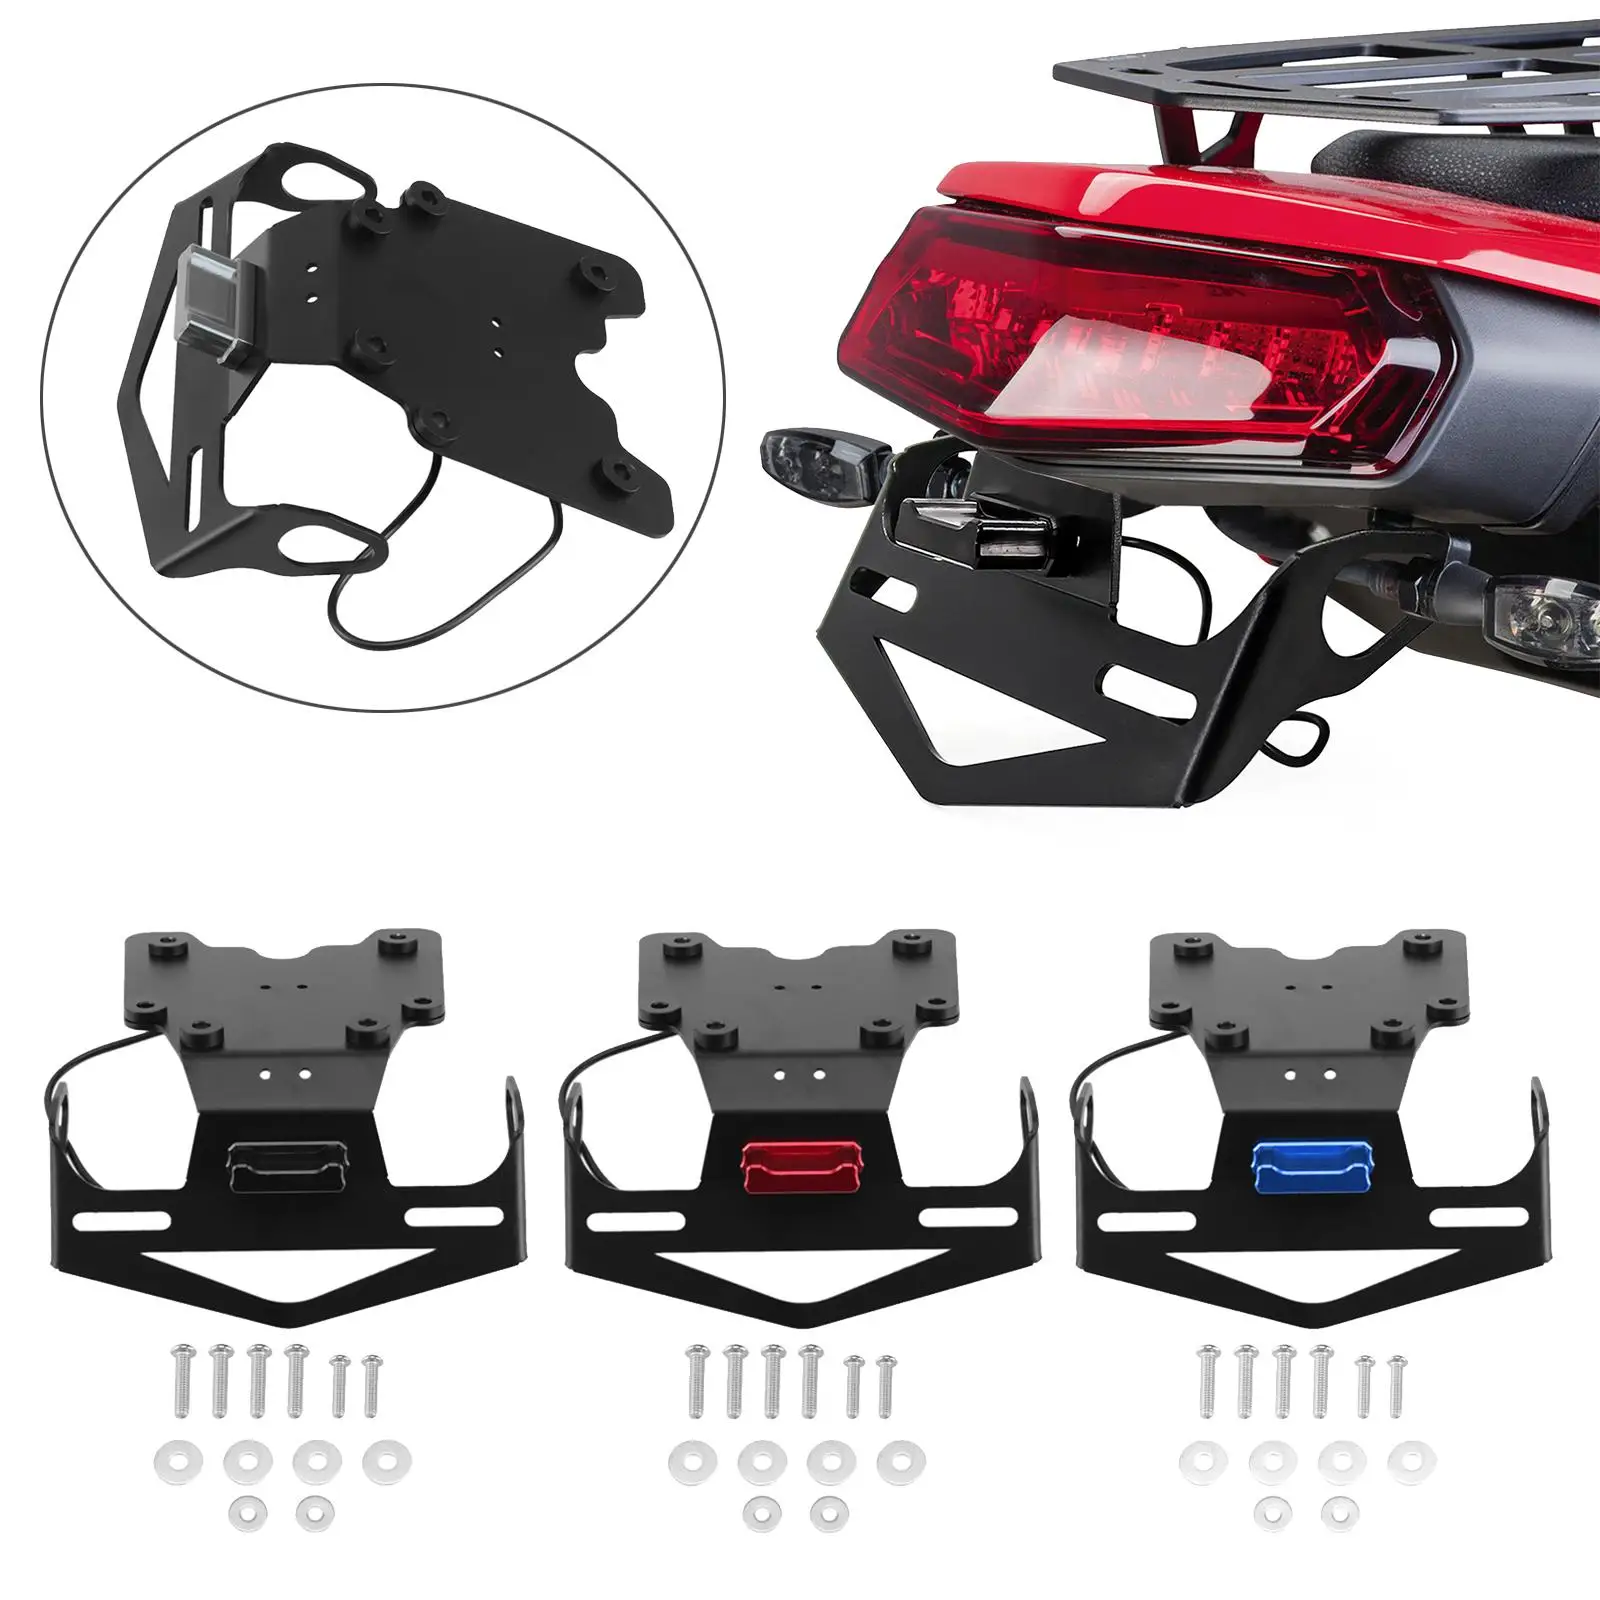 Motorbike Motorcycle Rear Holder Mount Bracket Assembly Compatible with Tenere 700 2019 2020 2021, stable performance